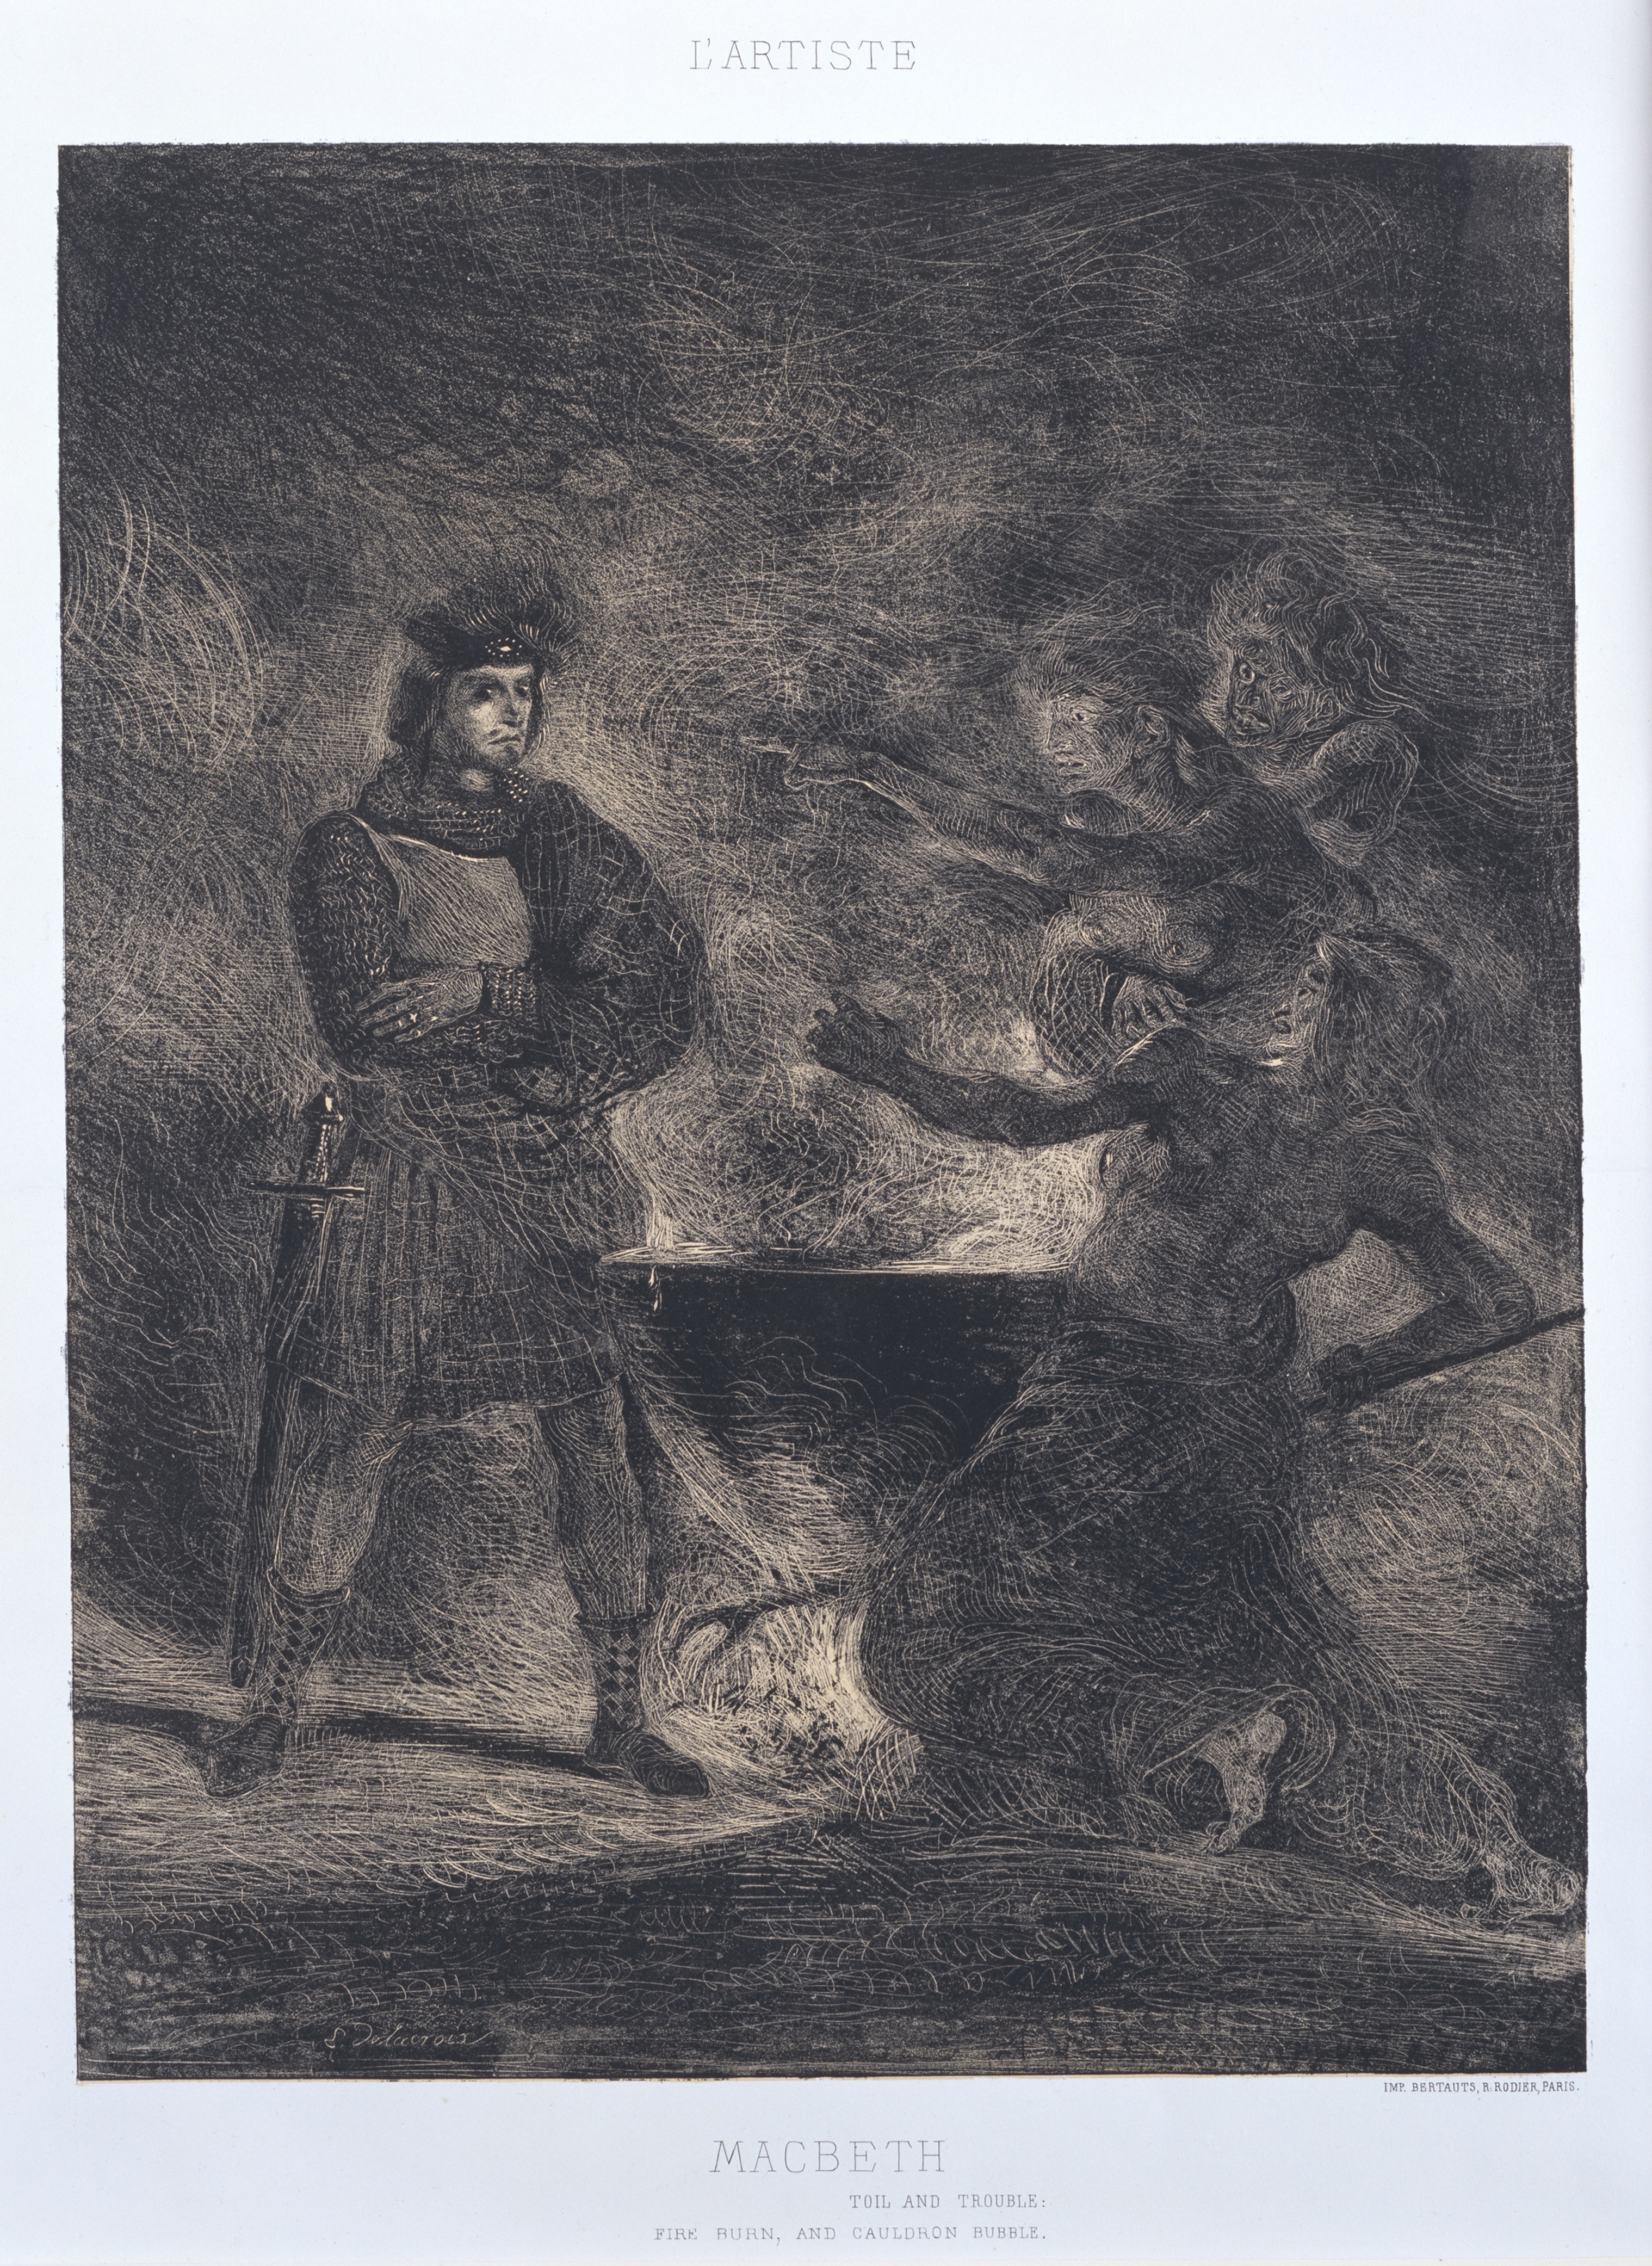 image: Macbeth Consulting the Witches